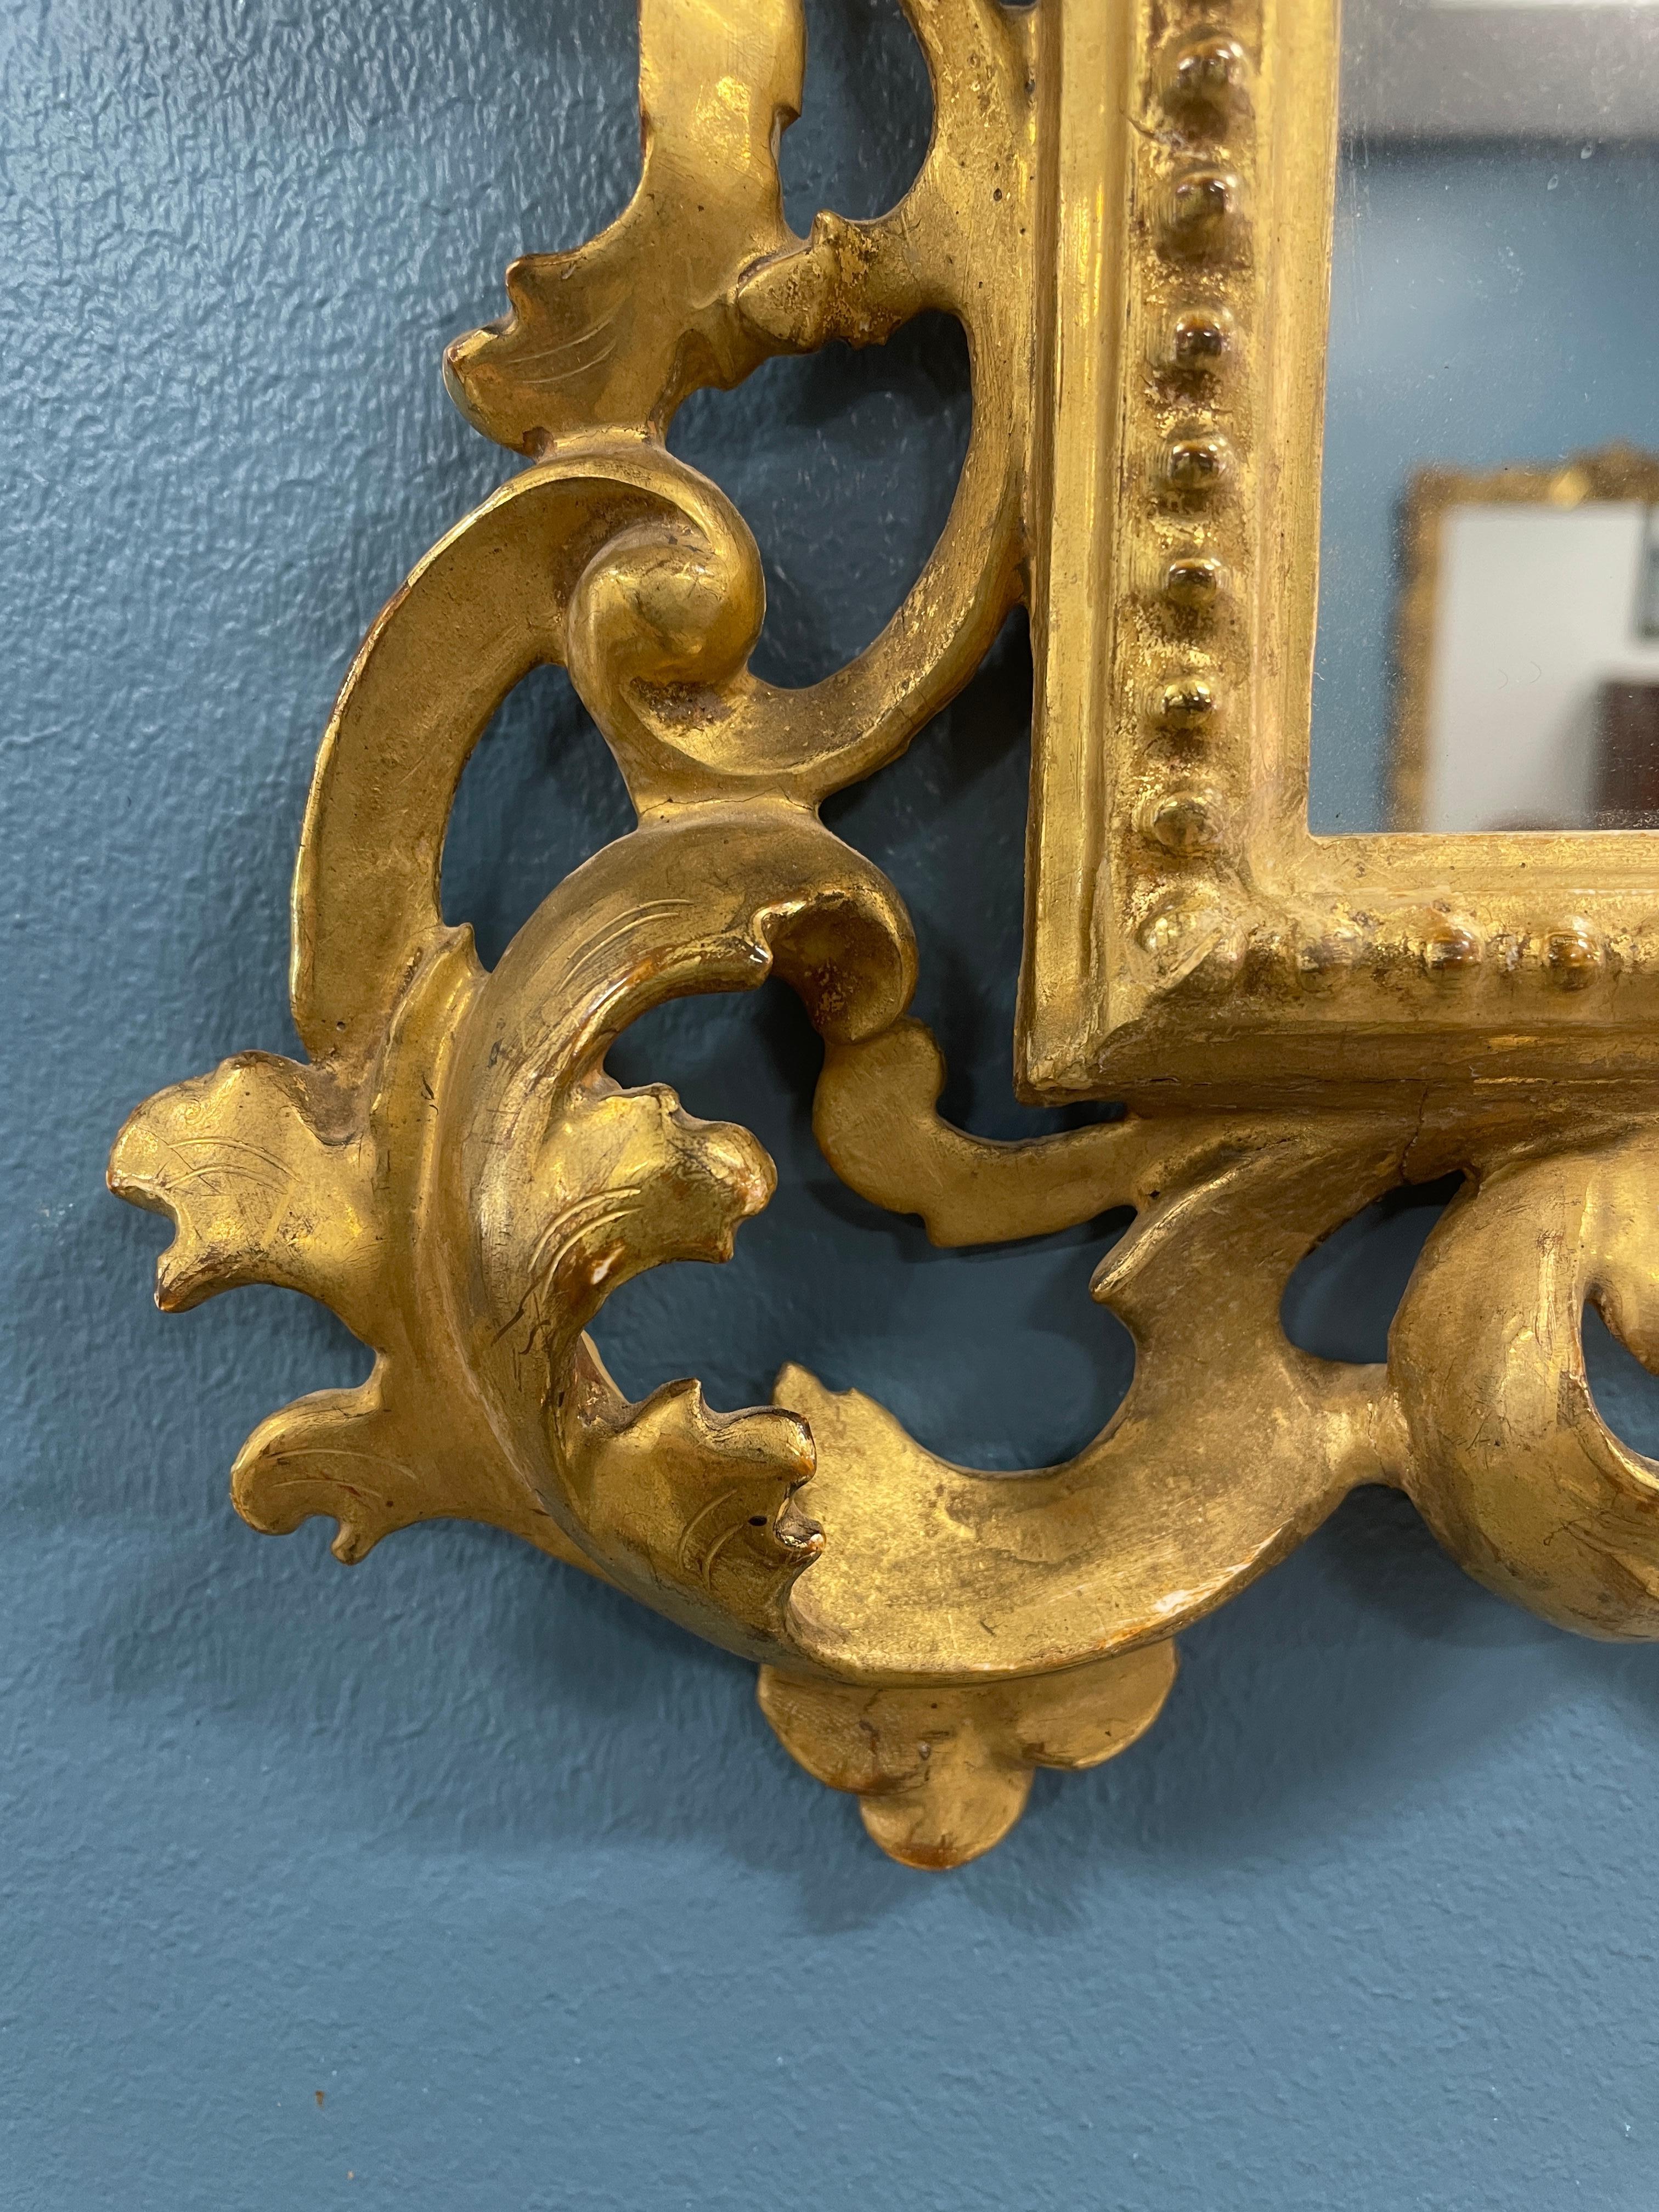 Discover the Beauty of a Hand-Carved Gilt Wood Wall Mirror with Acanthus Leaf Decor which dates back to the mid 19th century and comes from Germany. 

Experience the allure of this exquisite wall mirror featuring a meticulously hand-carved gilt wood